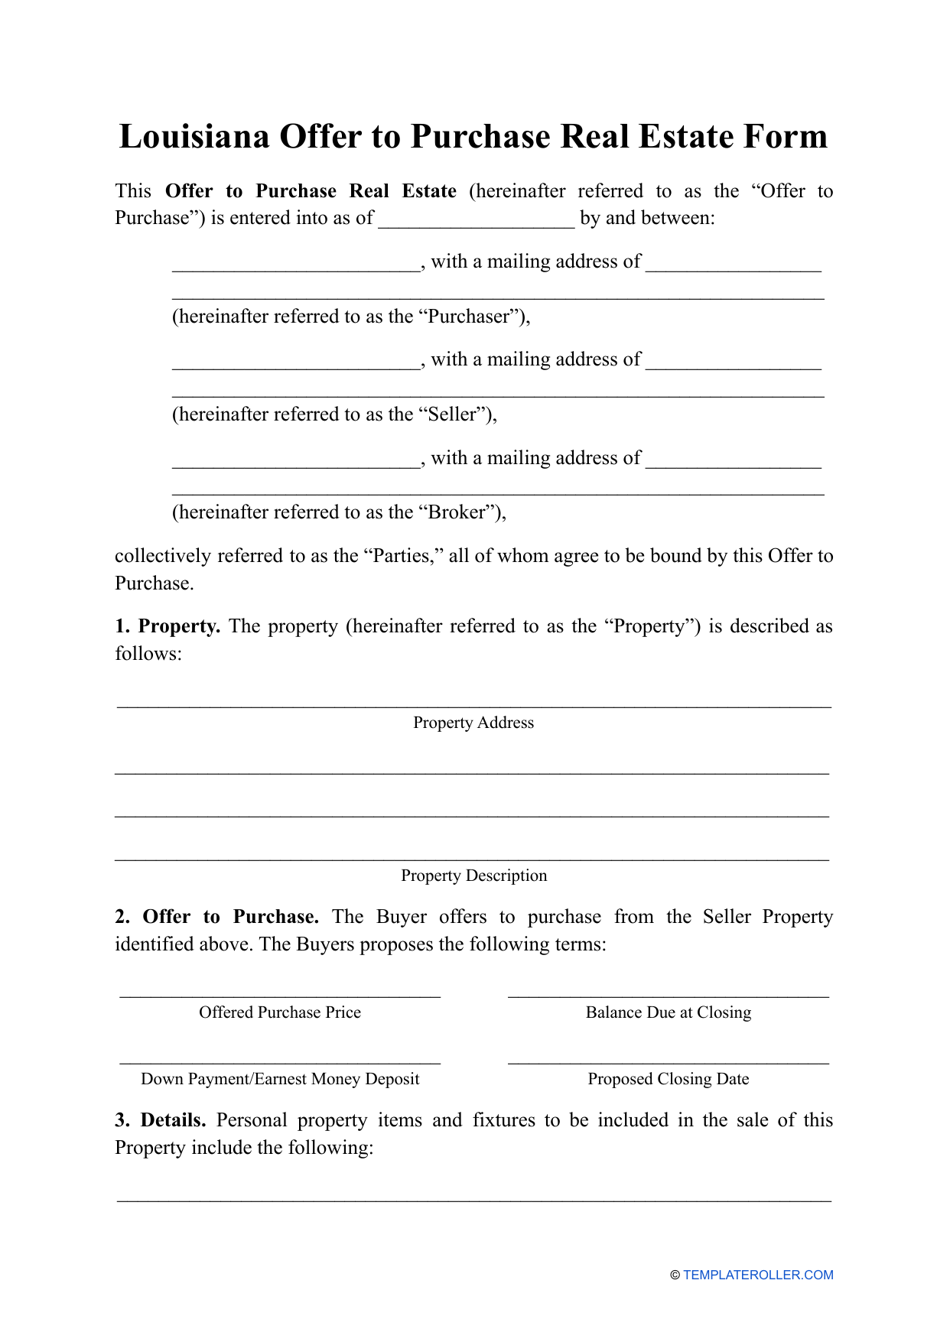 Offer to Purchase Real Estate Form - Louisiana, Page 1